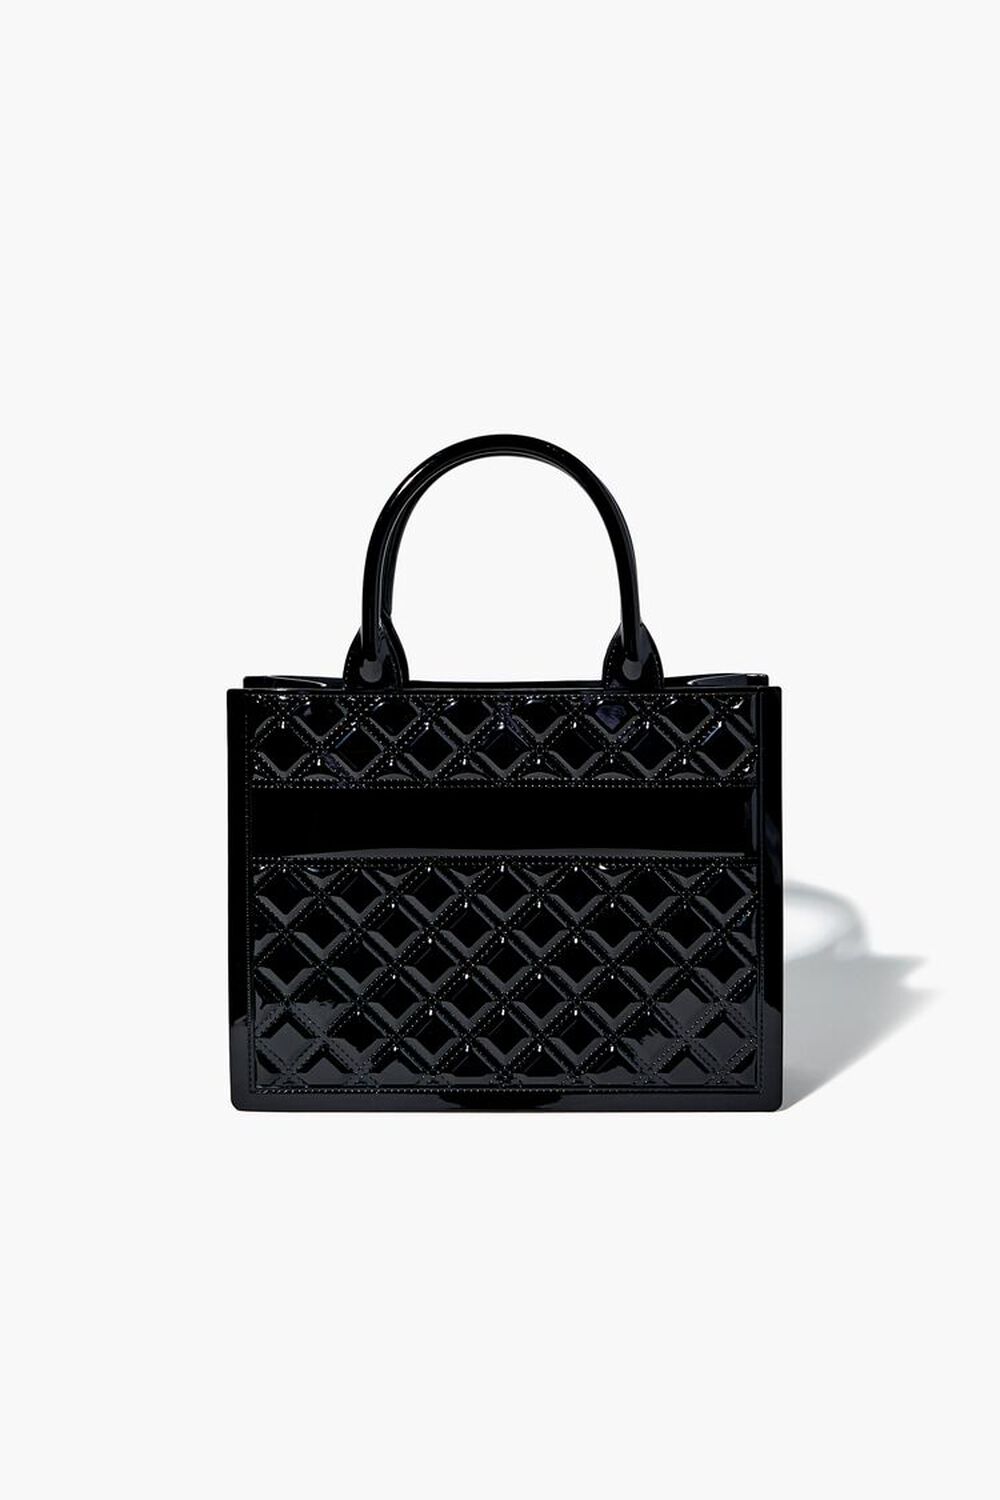 BLACK Faux Patent Leather Quilted Handbag, image 1